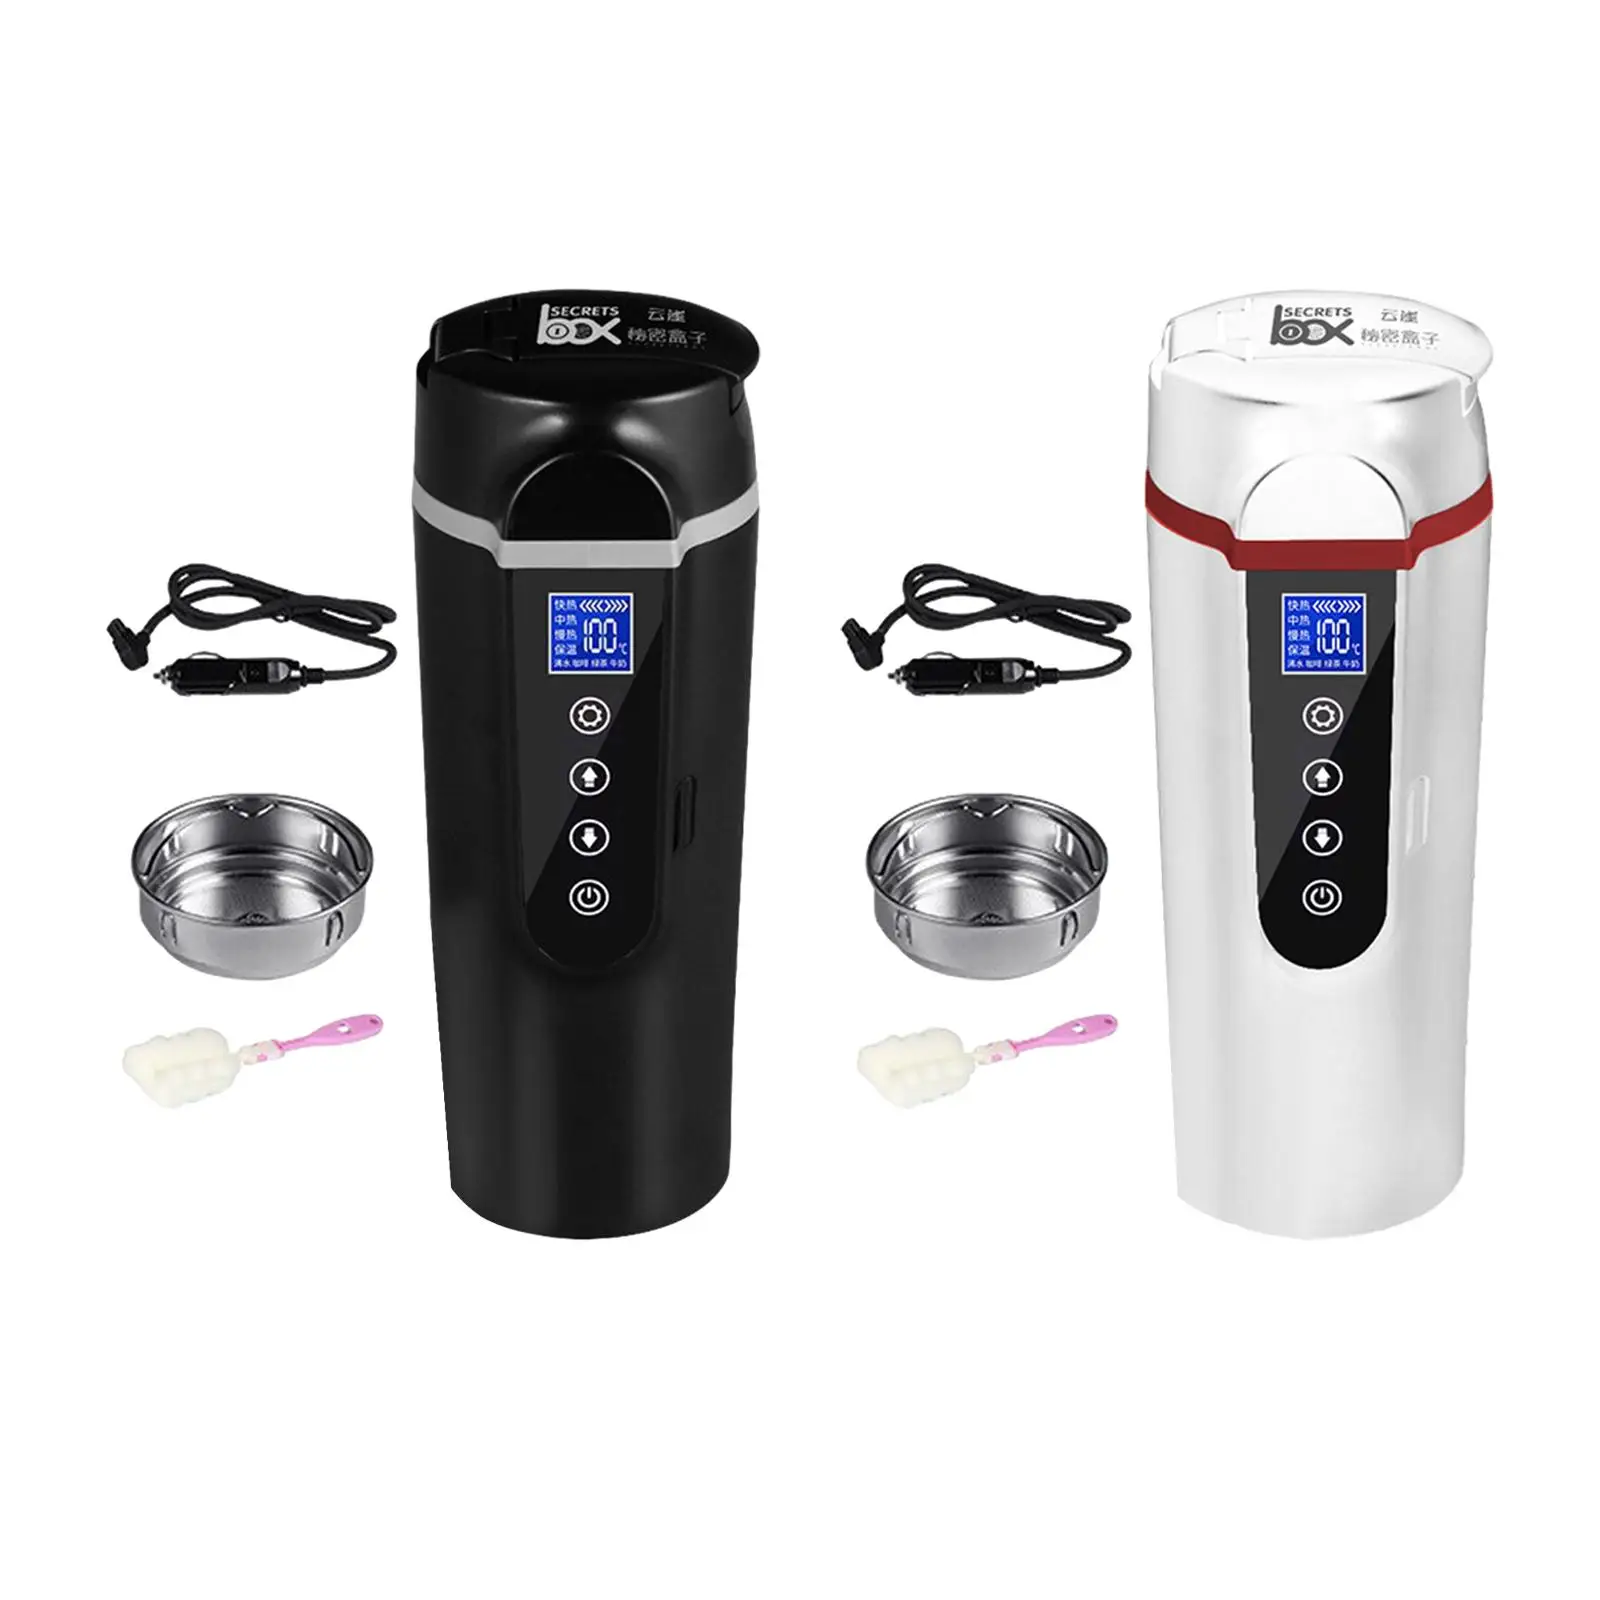 Car Heating Cup 24V/12V Traveling Kettle for Vehicles Trip Tea Water Milk